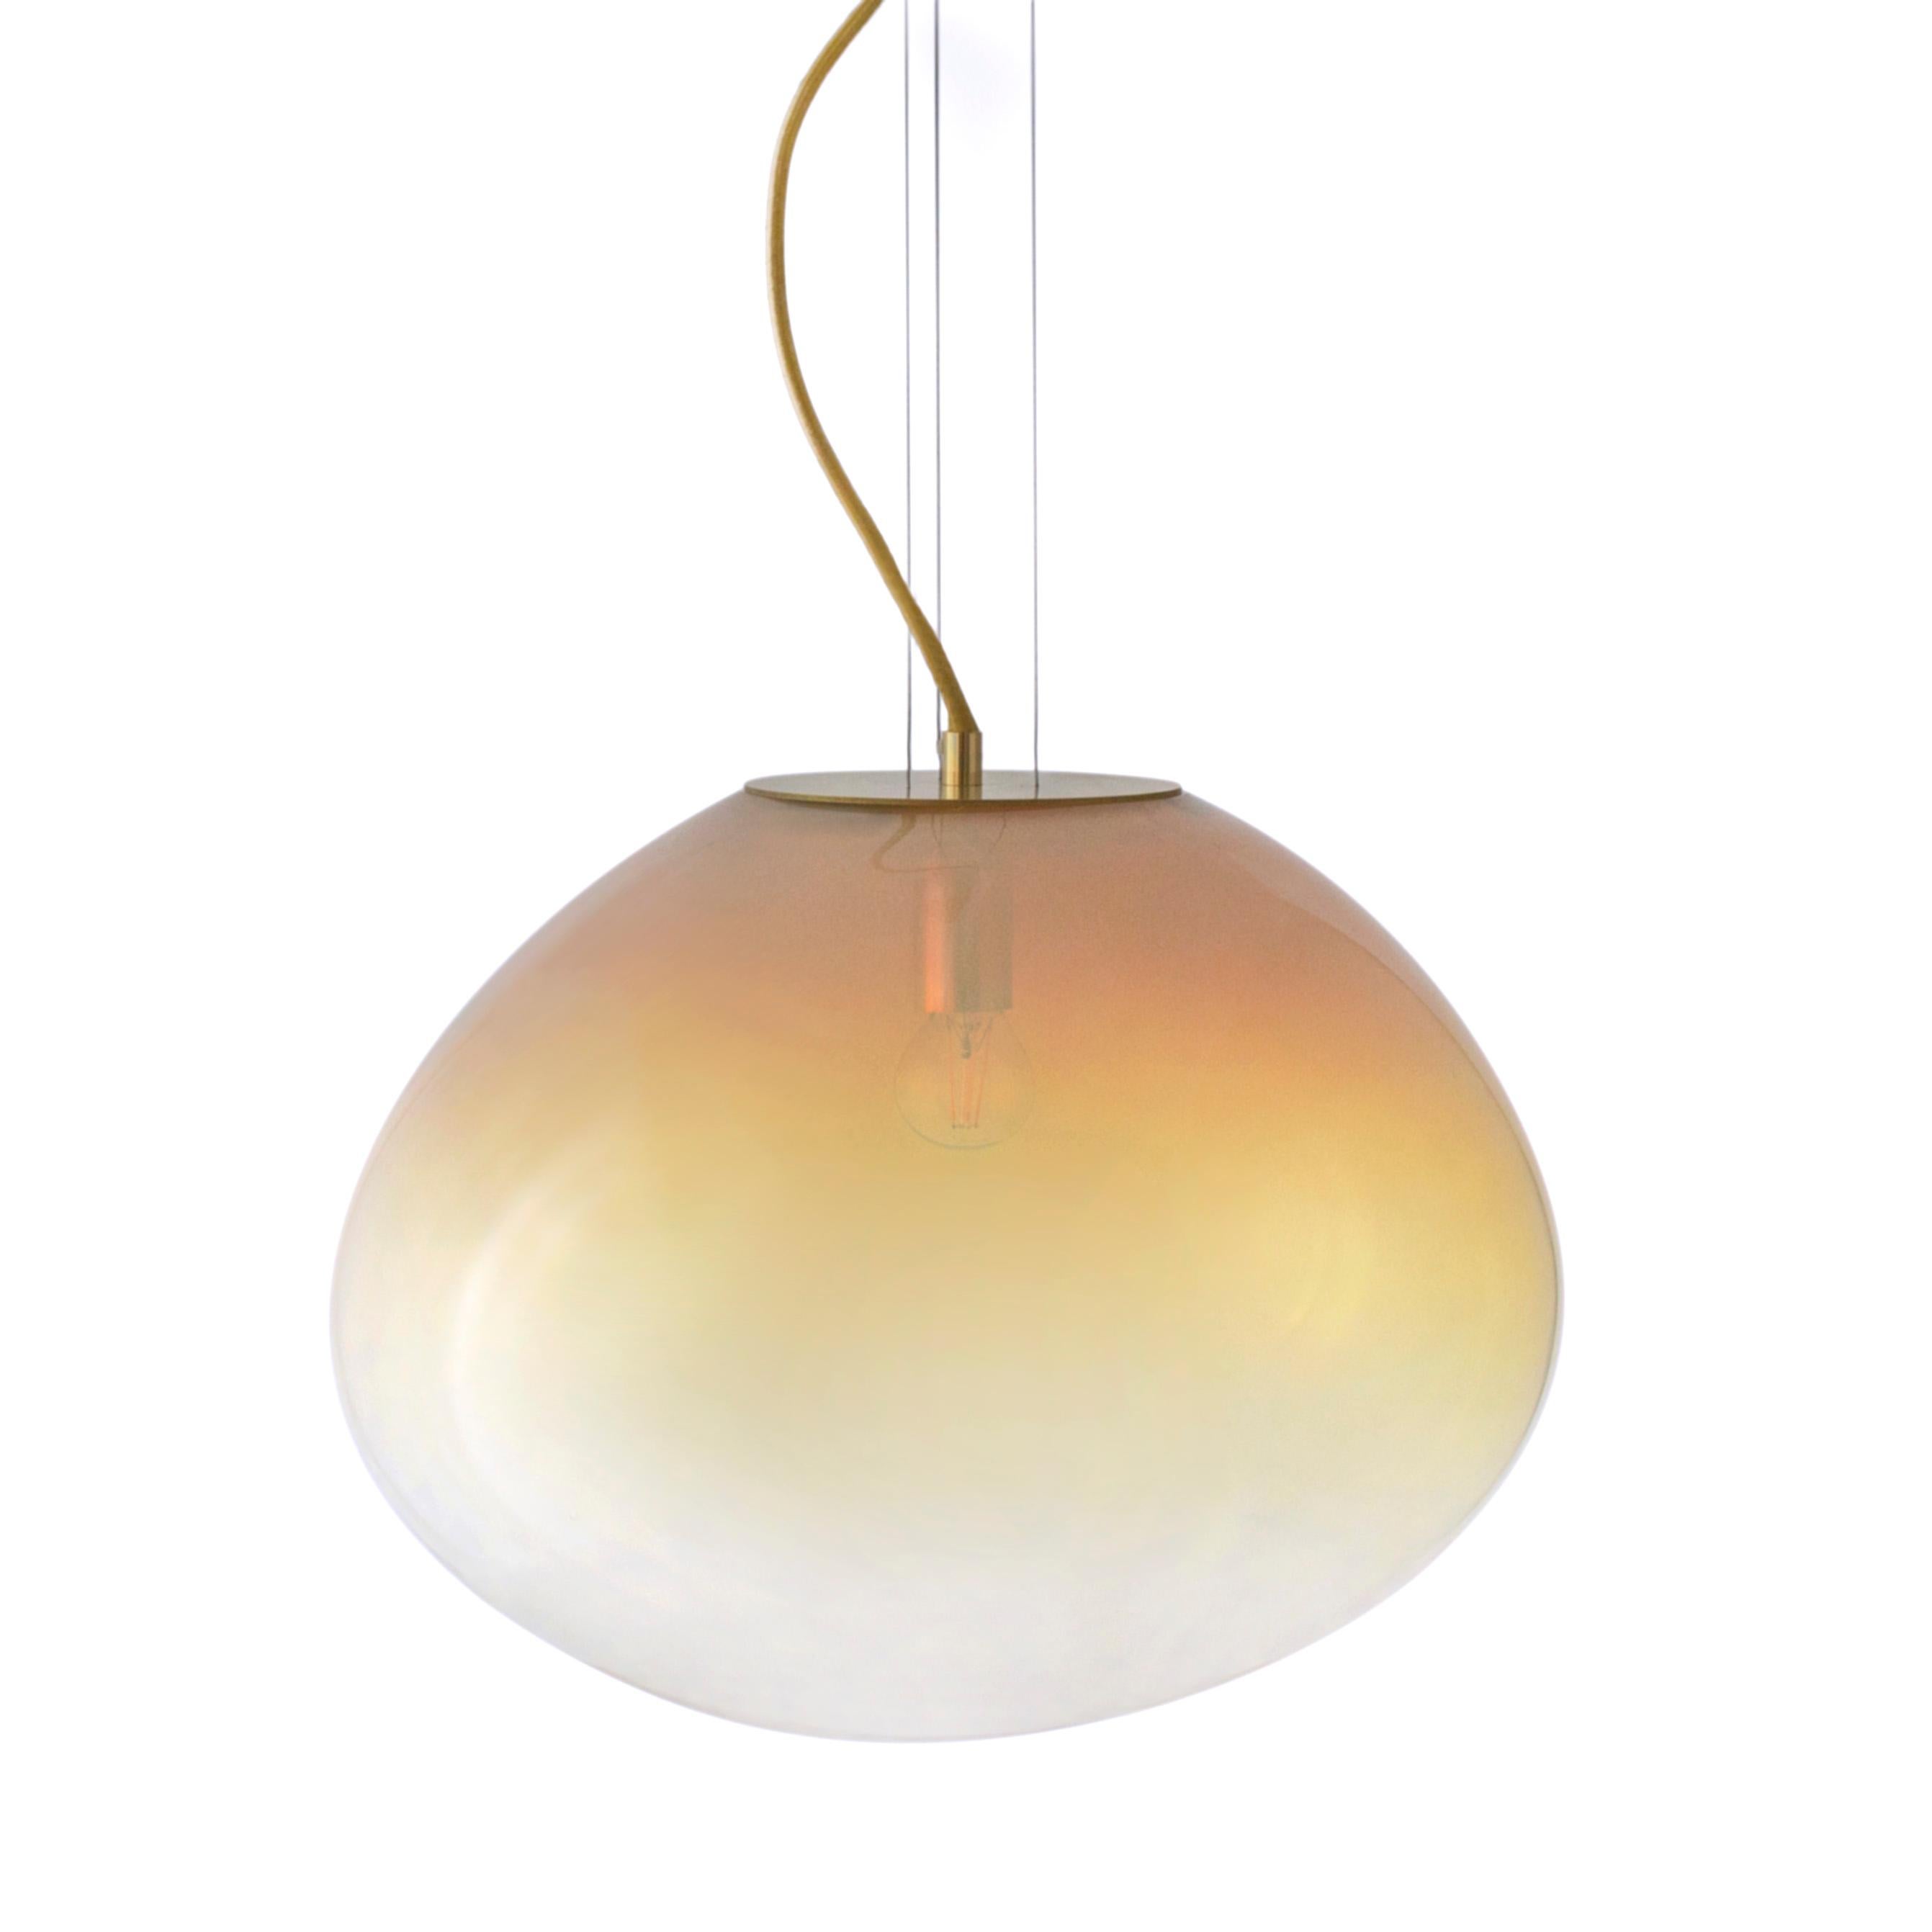 Sirius L Pendant by Eloa.
No UL listed 
Material: LED bulb, glass.
Dimensions: D 39 x W 40 x H 32 cm.
Also available in different colors and dimensions.

All our lamps can be wired according to each country. If sold to the USA it will be wired for